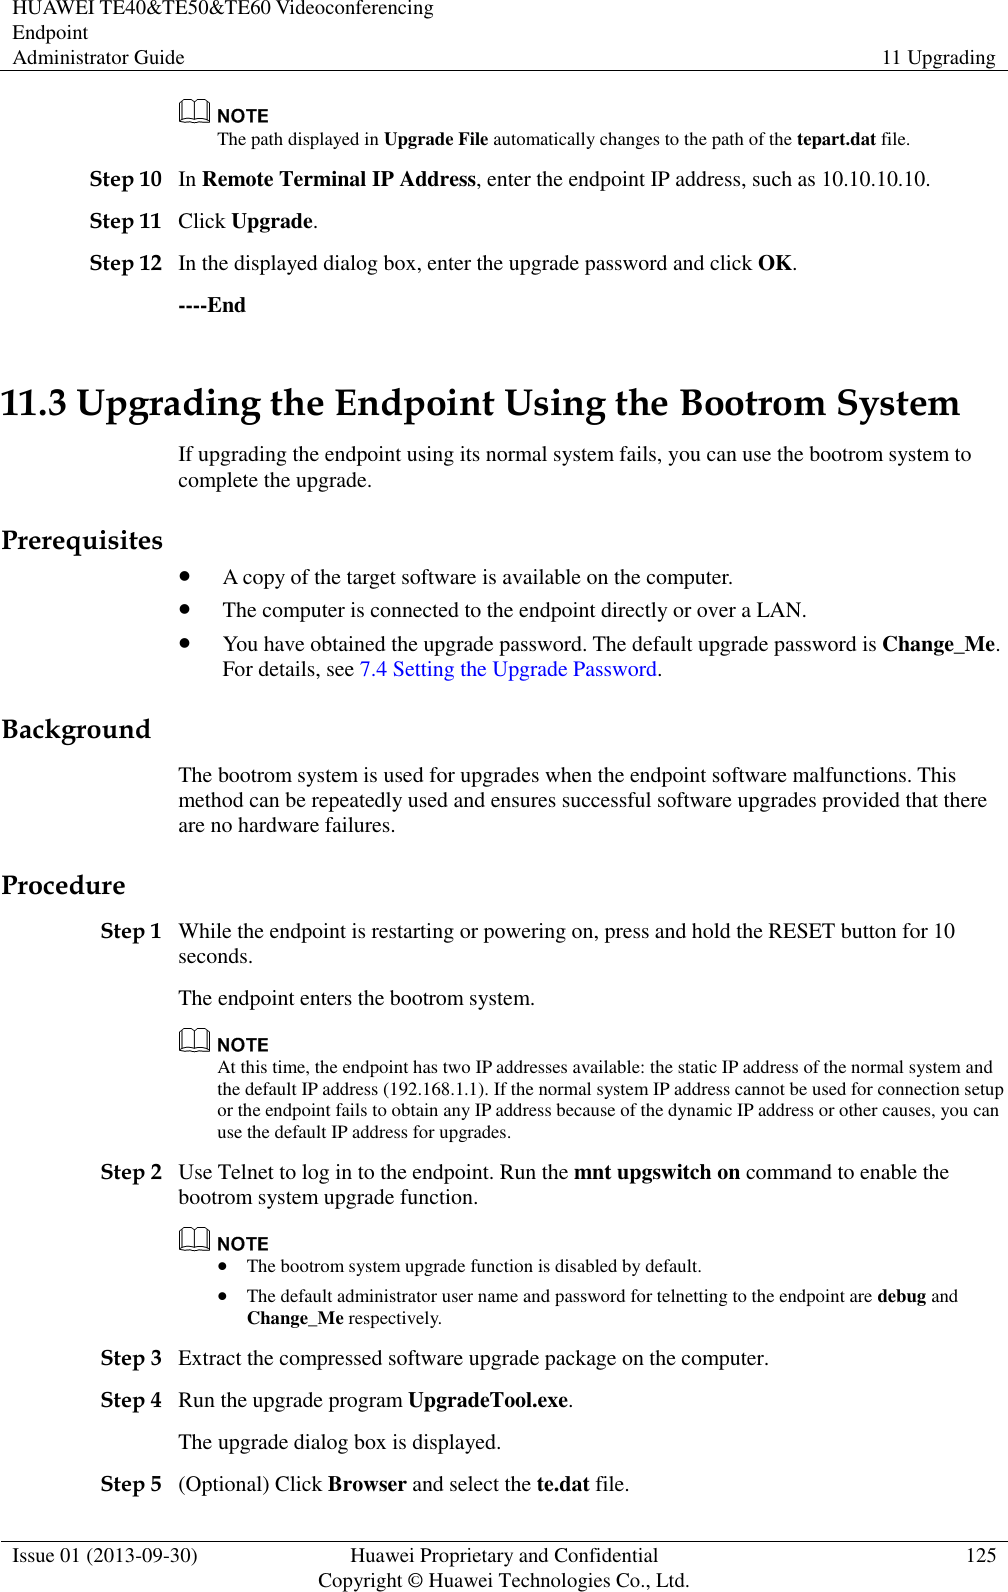 HUAWEI TE40&amp;TE50&amp;TE60 Videoconferencing Endpoint Administrator Guide 11 Upgrading  Issue 01 (2013-09-30) Huawei Proprietary and Confidential                                     Copyright © Huawei Technologies Co., Ltd. 125   The path displayed in Upgrade File automatically changes to the path of the tepart.dat file. Step 10 In Remote Terminal IP Address, enter the endpoint IP address, such as 10.10.10.10. Step 11 Click Upgrade. Step 12 In the displayed dialog box, enter the upgrade password and click OK. ----End 11.3 Upgrading the Endpoint Using the Bootrom System If upgrading the endpoint using its normal system fails, you can use the bootrom system to complete the upgrade.   Prerequisites  A copy of the target software is available on the computer.  The computer is connected to the endpoint directly or over a LAN.  You have obtained the upgrade password. The default upgrade password is Change_Me. For details, see 7.4 Setting the Upgrade Password. Background The bootrom system is used for upgrades when the endpoint software malfunctions. This method can be repeatedly used and ensures successful software upgrades provided that there are no hardware failures. Procedure Step 1 While the endpoint is restarting or powering on, press and hold the RESET button for 10 seconds. The endpoint enters the bootrom system.  At this time, the endpoint has two IP addresses available: the static IP address of the normal system and the default IP address (192.168.1.1). If the normal system IP address cannot be used for connection setup or the endpoint fails to obtain any IP address because of the dynamic IP address or other causes, you can use the default IP address for upgrades. Step 2 Use Telnet to log in to the endpoint. Run the mnt upgswitch on command to enable the bootrom system upgrade function.   The bootrom system upgrade function is disabled by default.  The default administrator user name and password for telnetting to the endpoint are debug and Change_Me respectively. Step 3 Extract the compressed software upgrade package on the computer.   Step 4 Run the upgrade program UpgradeTool.exe. The upgrade dialog box is displayed. Step 5 (Optional) Click Browser and select the te.dat file. 